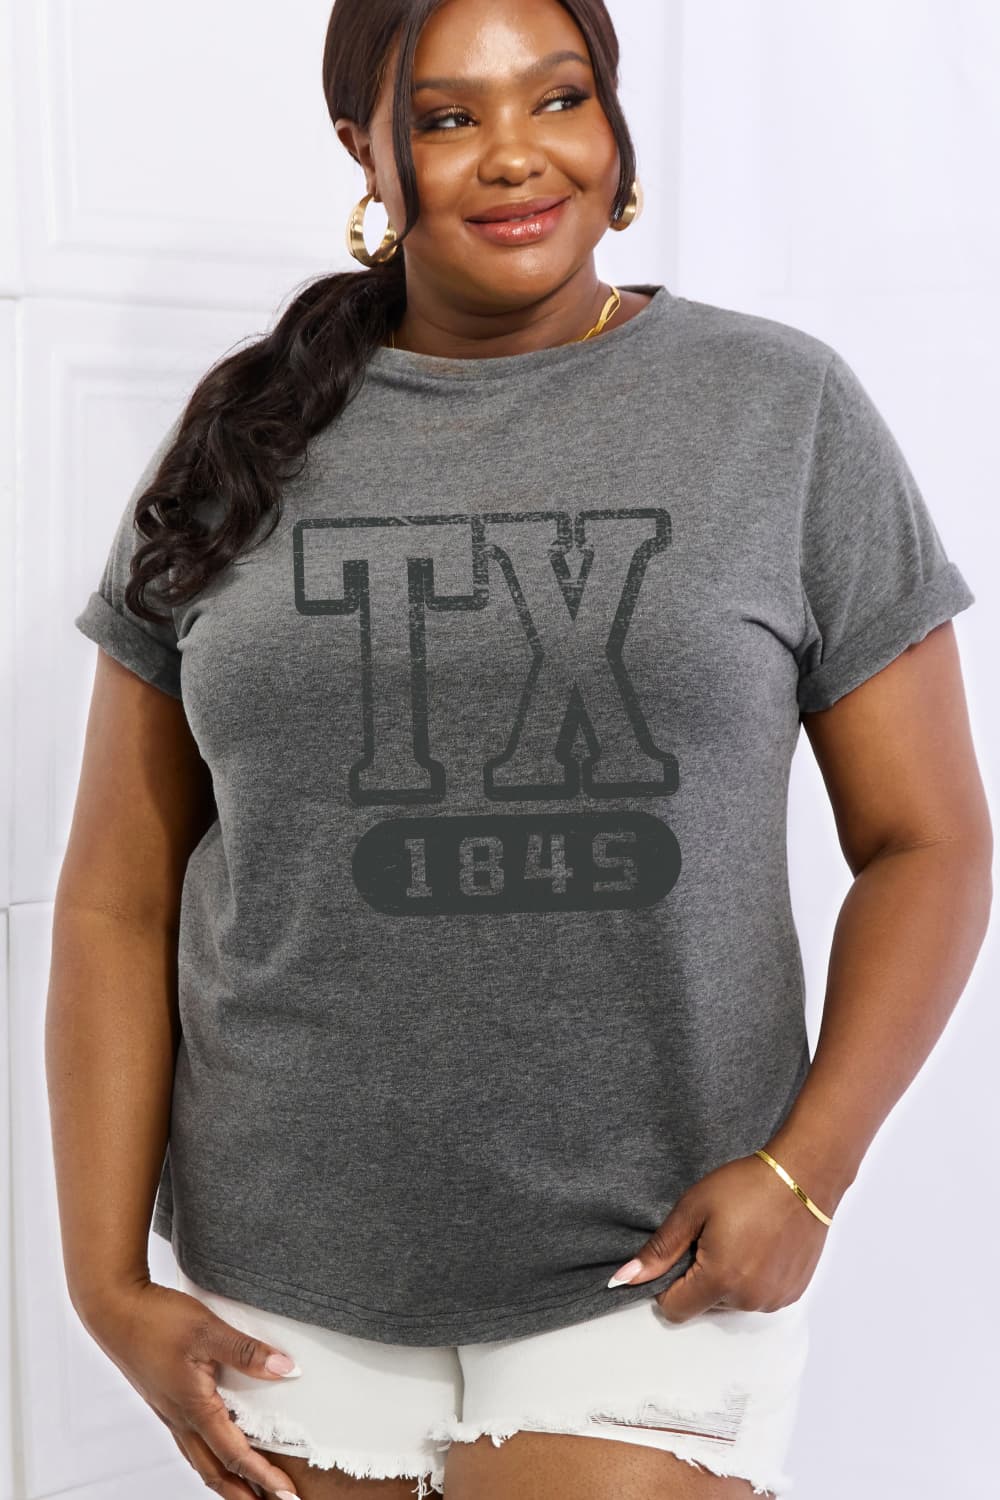 Simply Love Full Size TX 1845 Graphic Cotton Tee